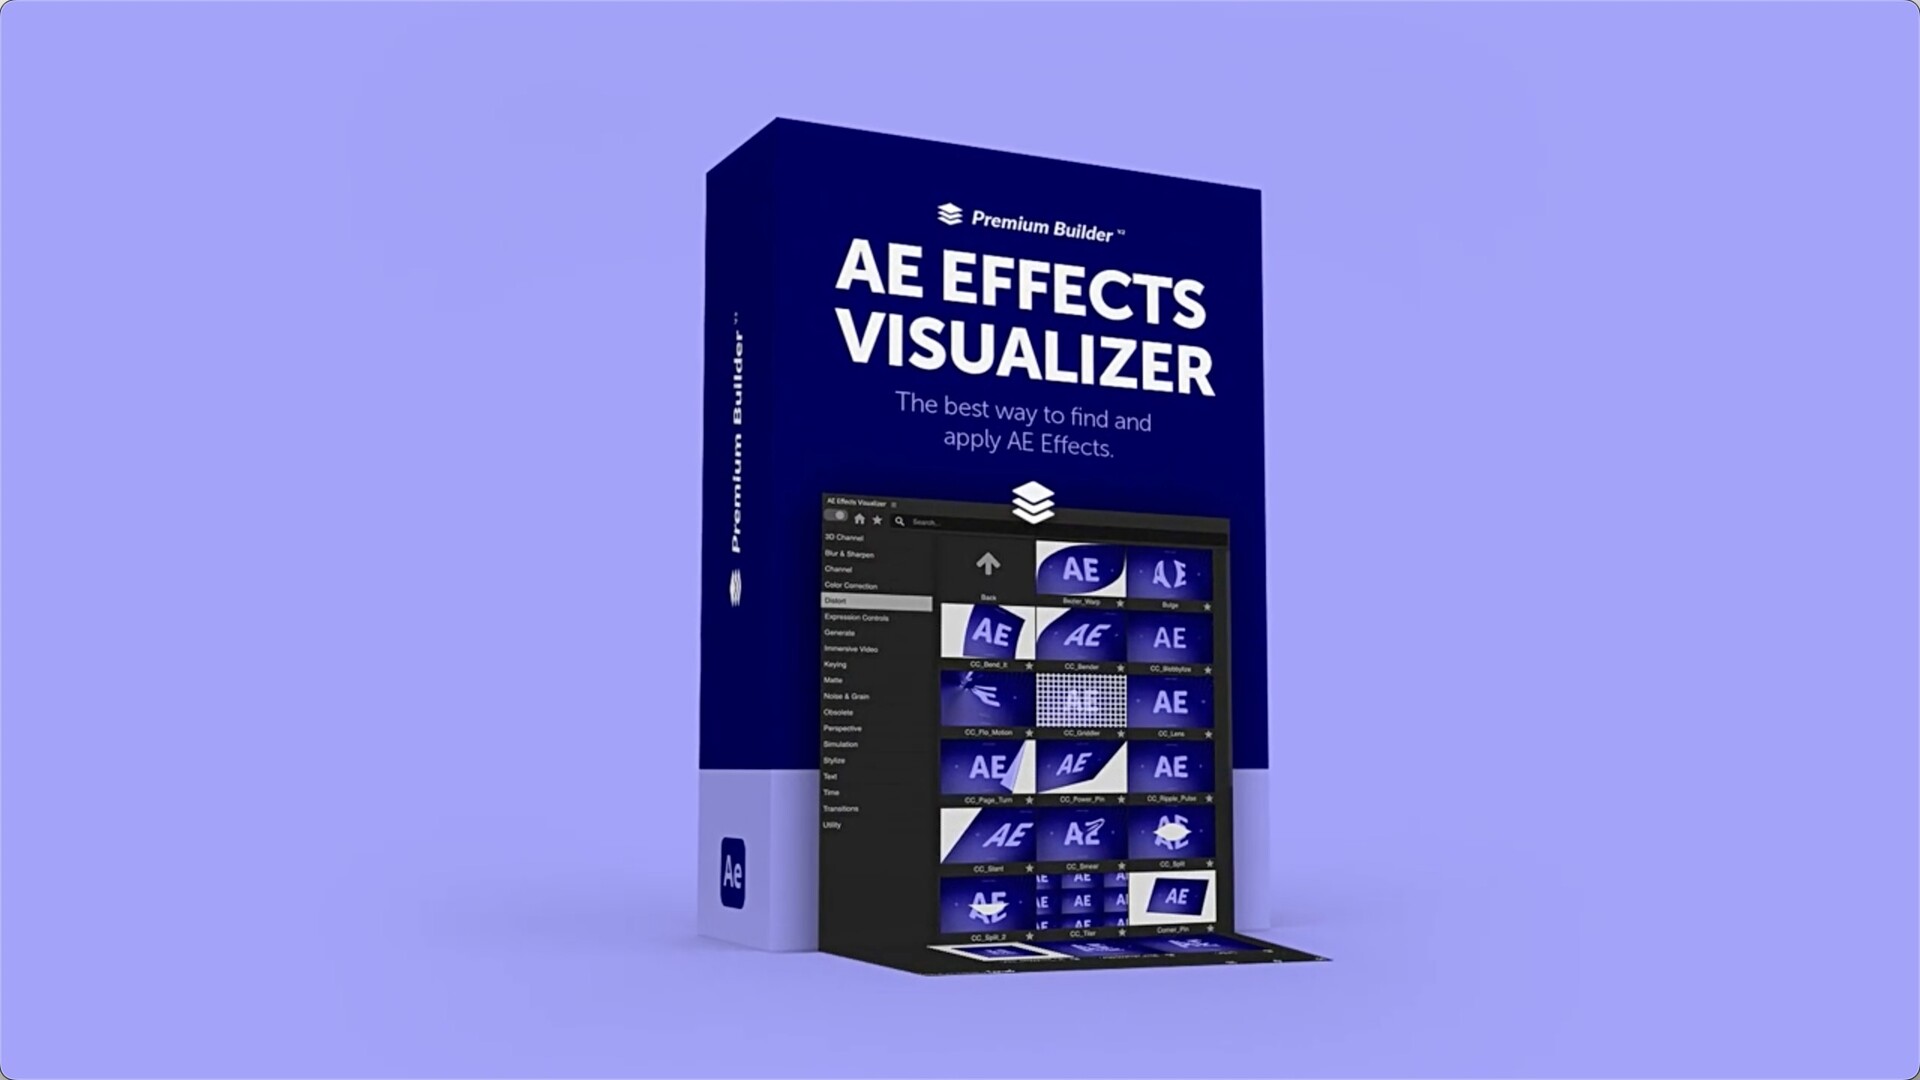 AE视觉特效可视化预设：Effects Visualizer for Mac